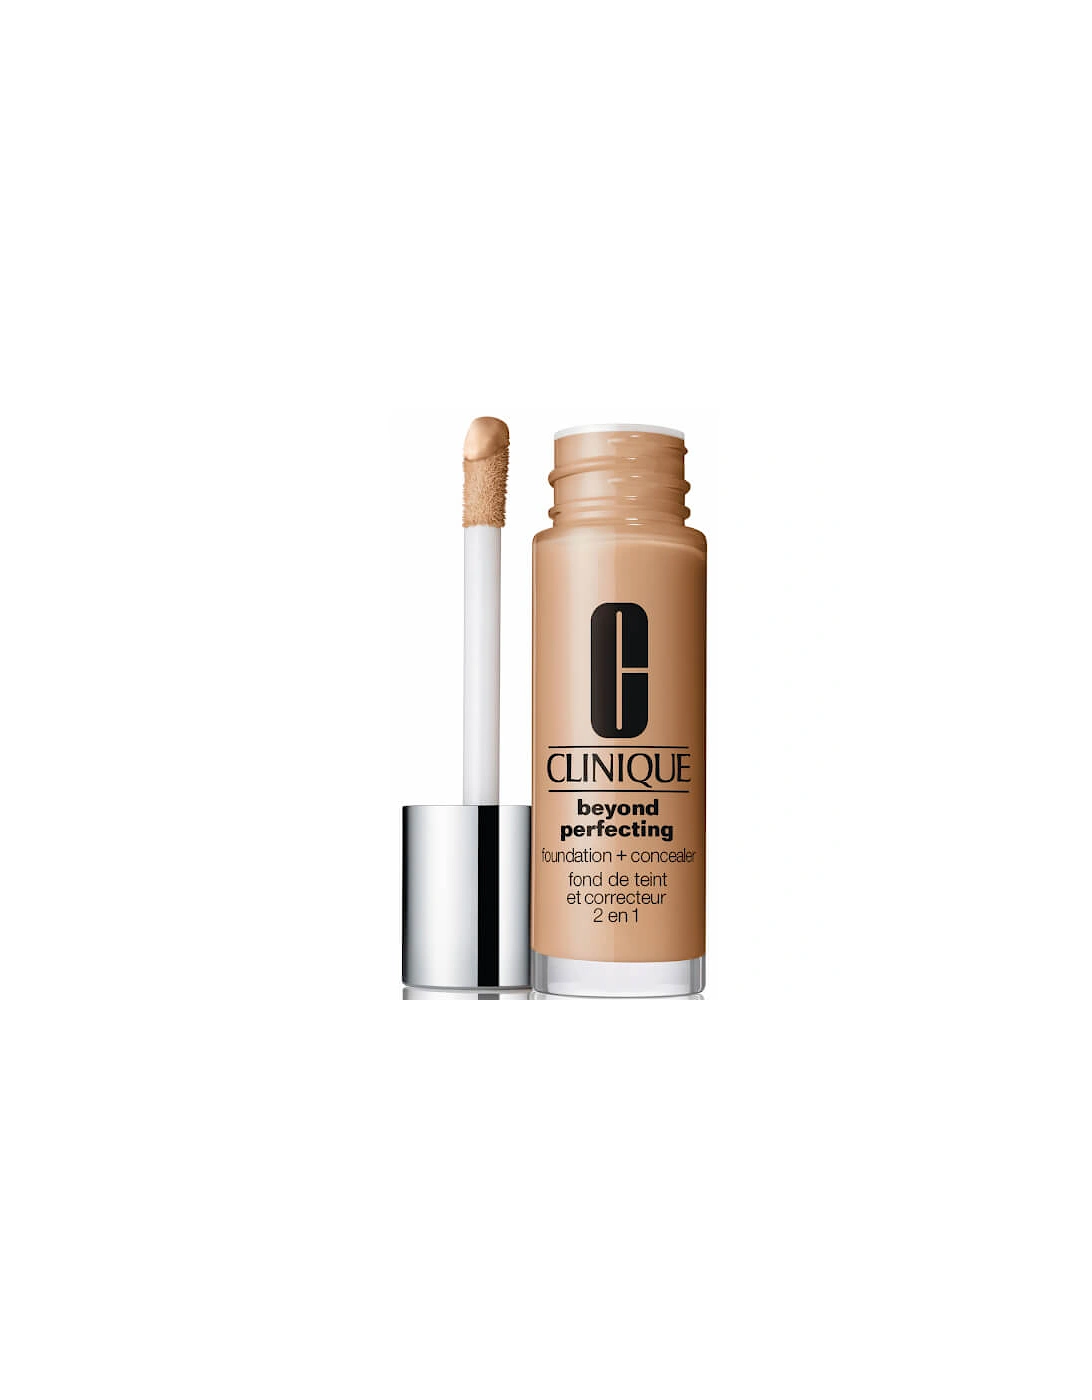 Beyond Perfecting Foundation and Concealer Vanilla, 2 of 1